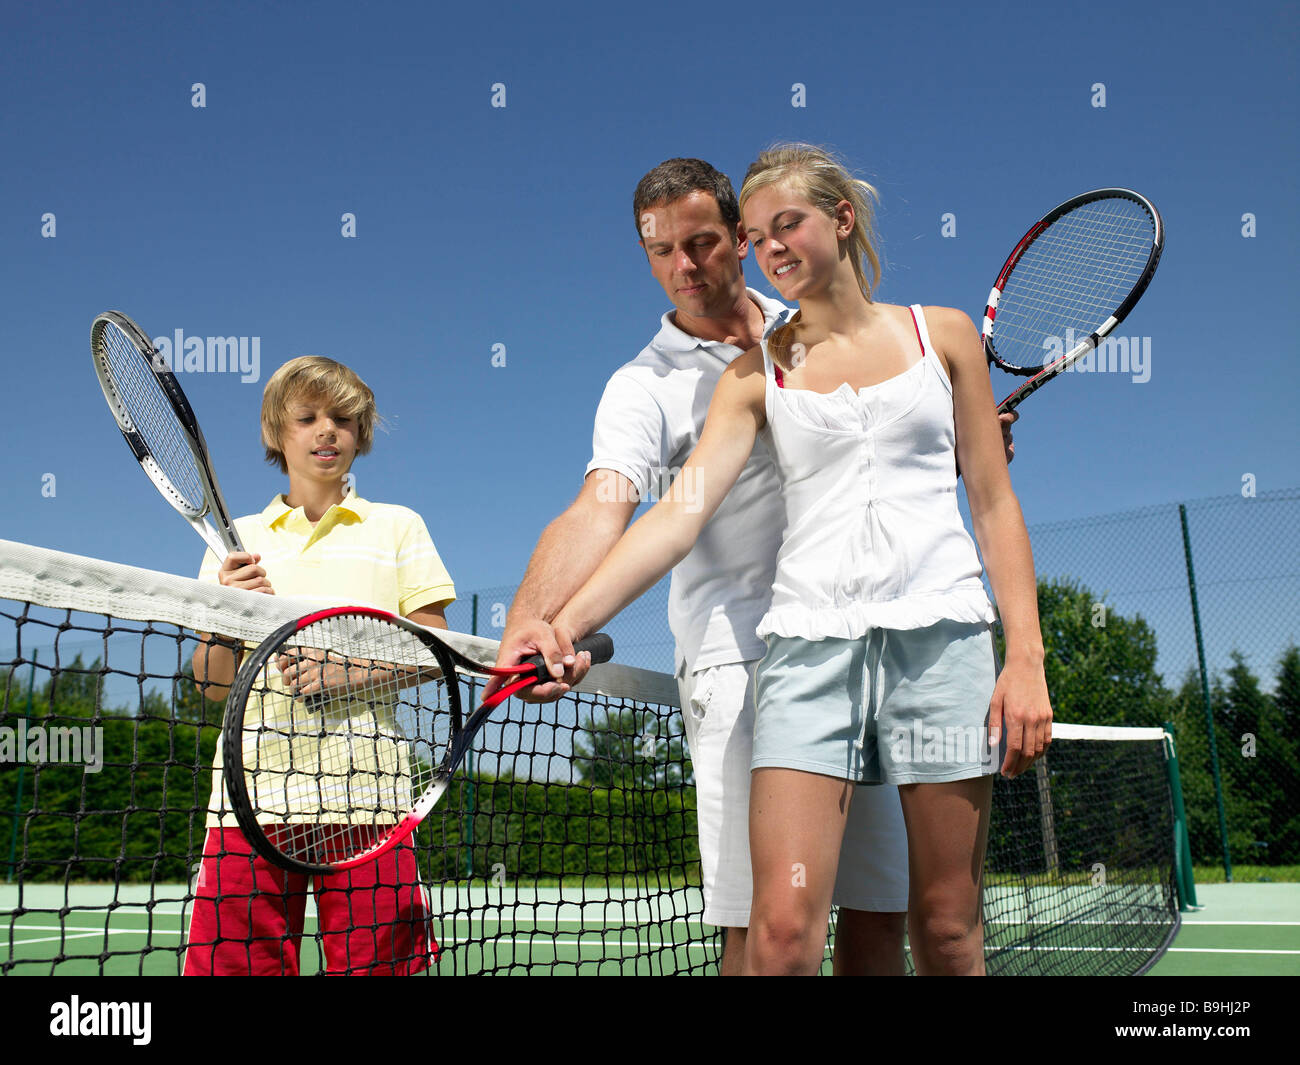 Tennis lesson under the heat Stock Photo